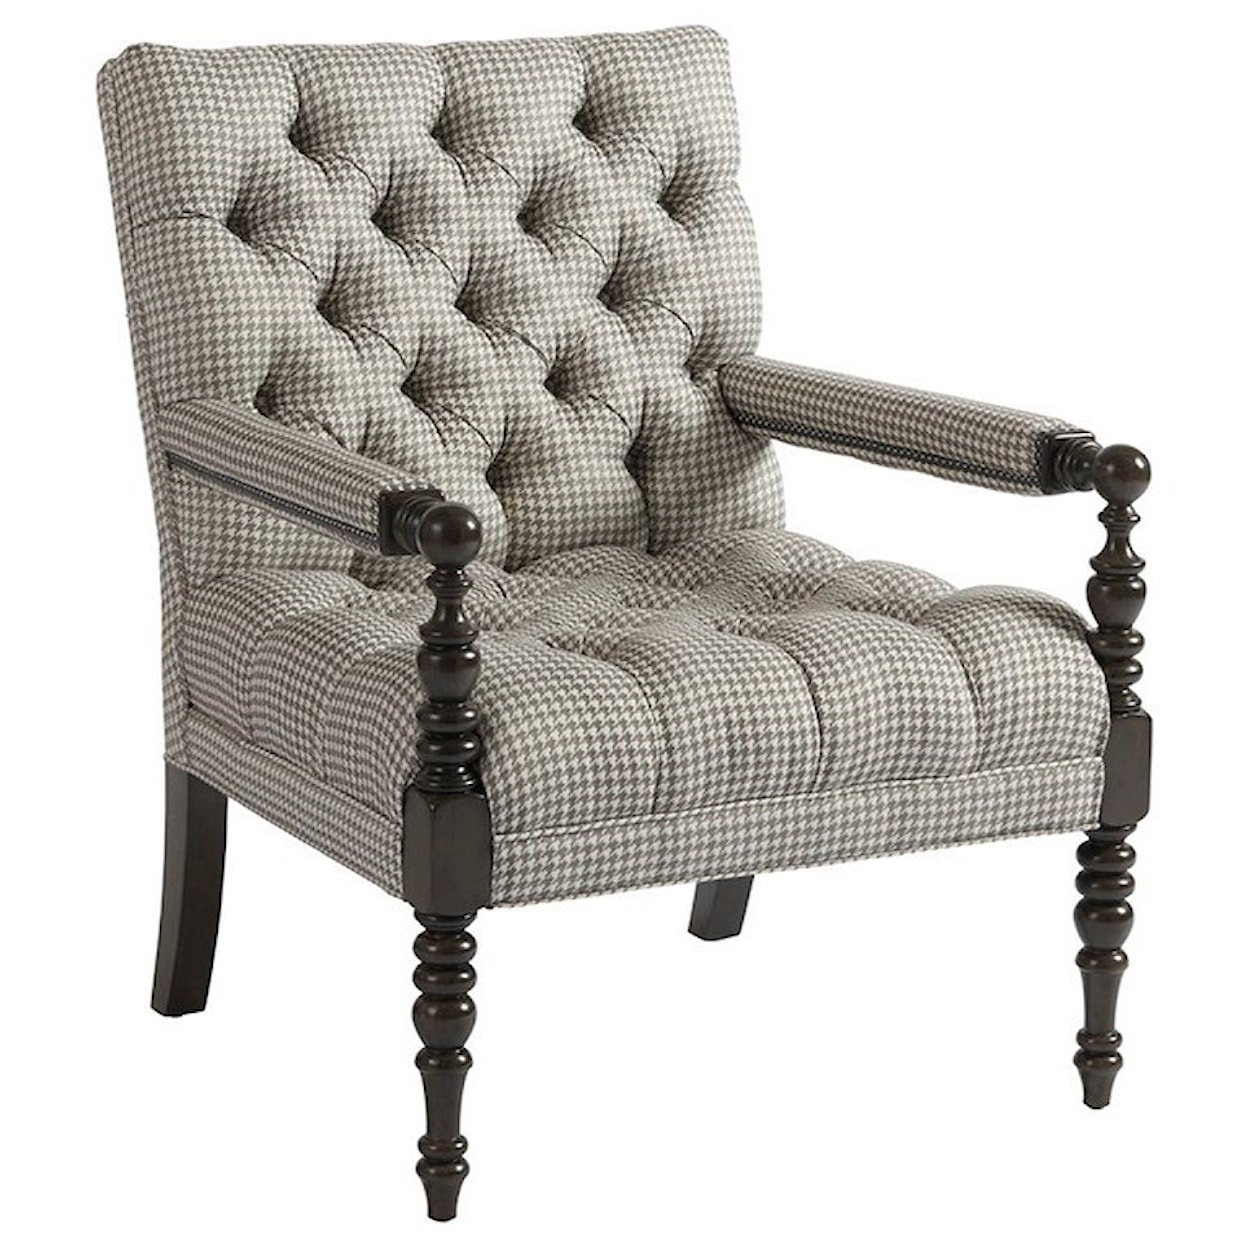 Barclay Butera Barclay Butera Upholstery Belcourt Tufted Chair